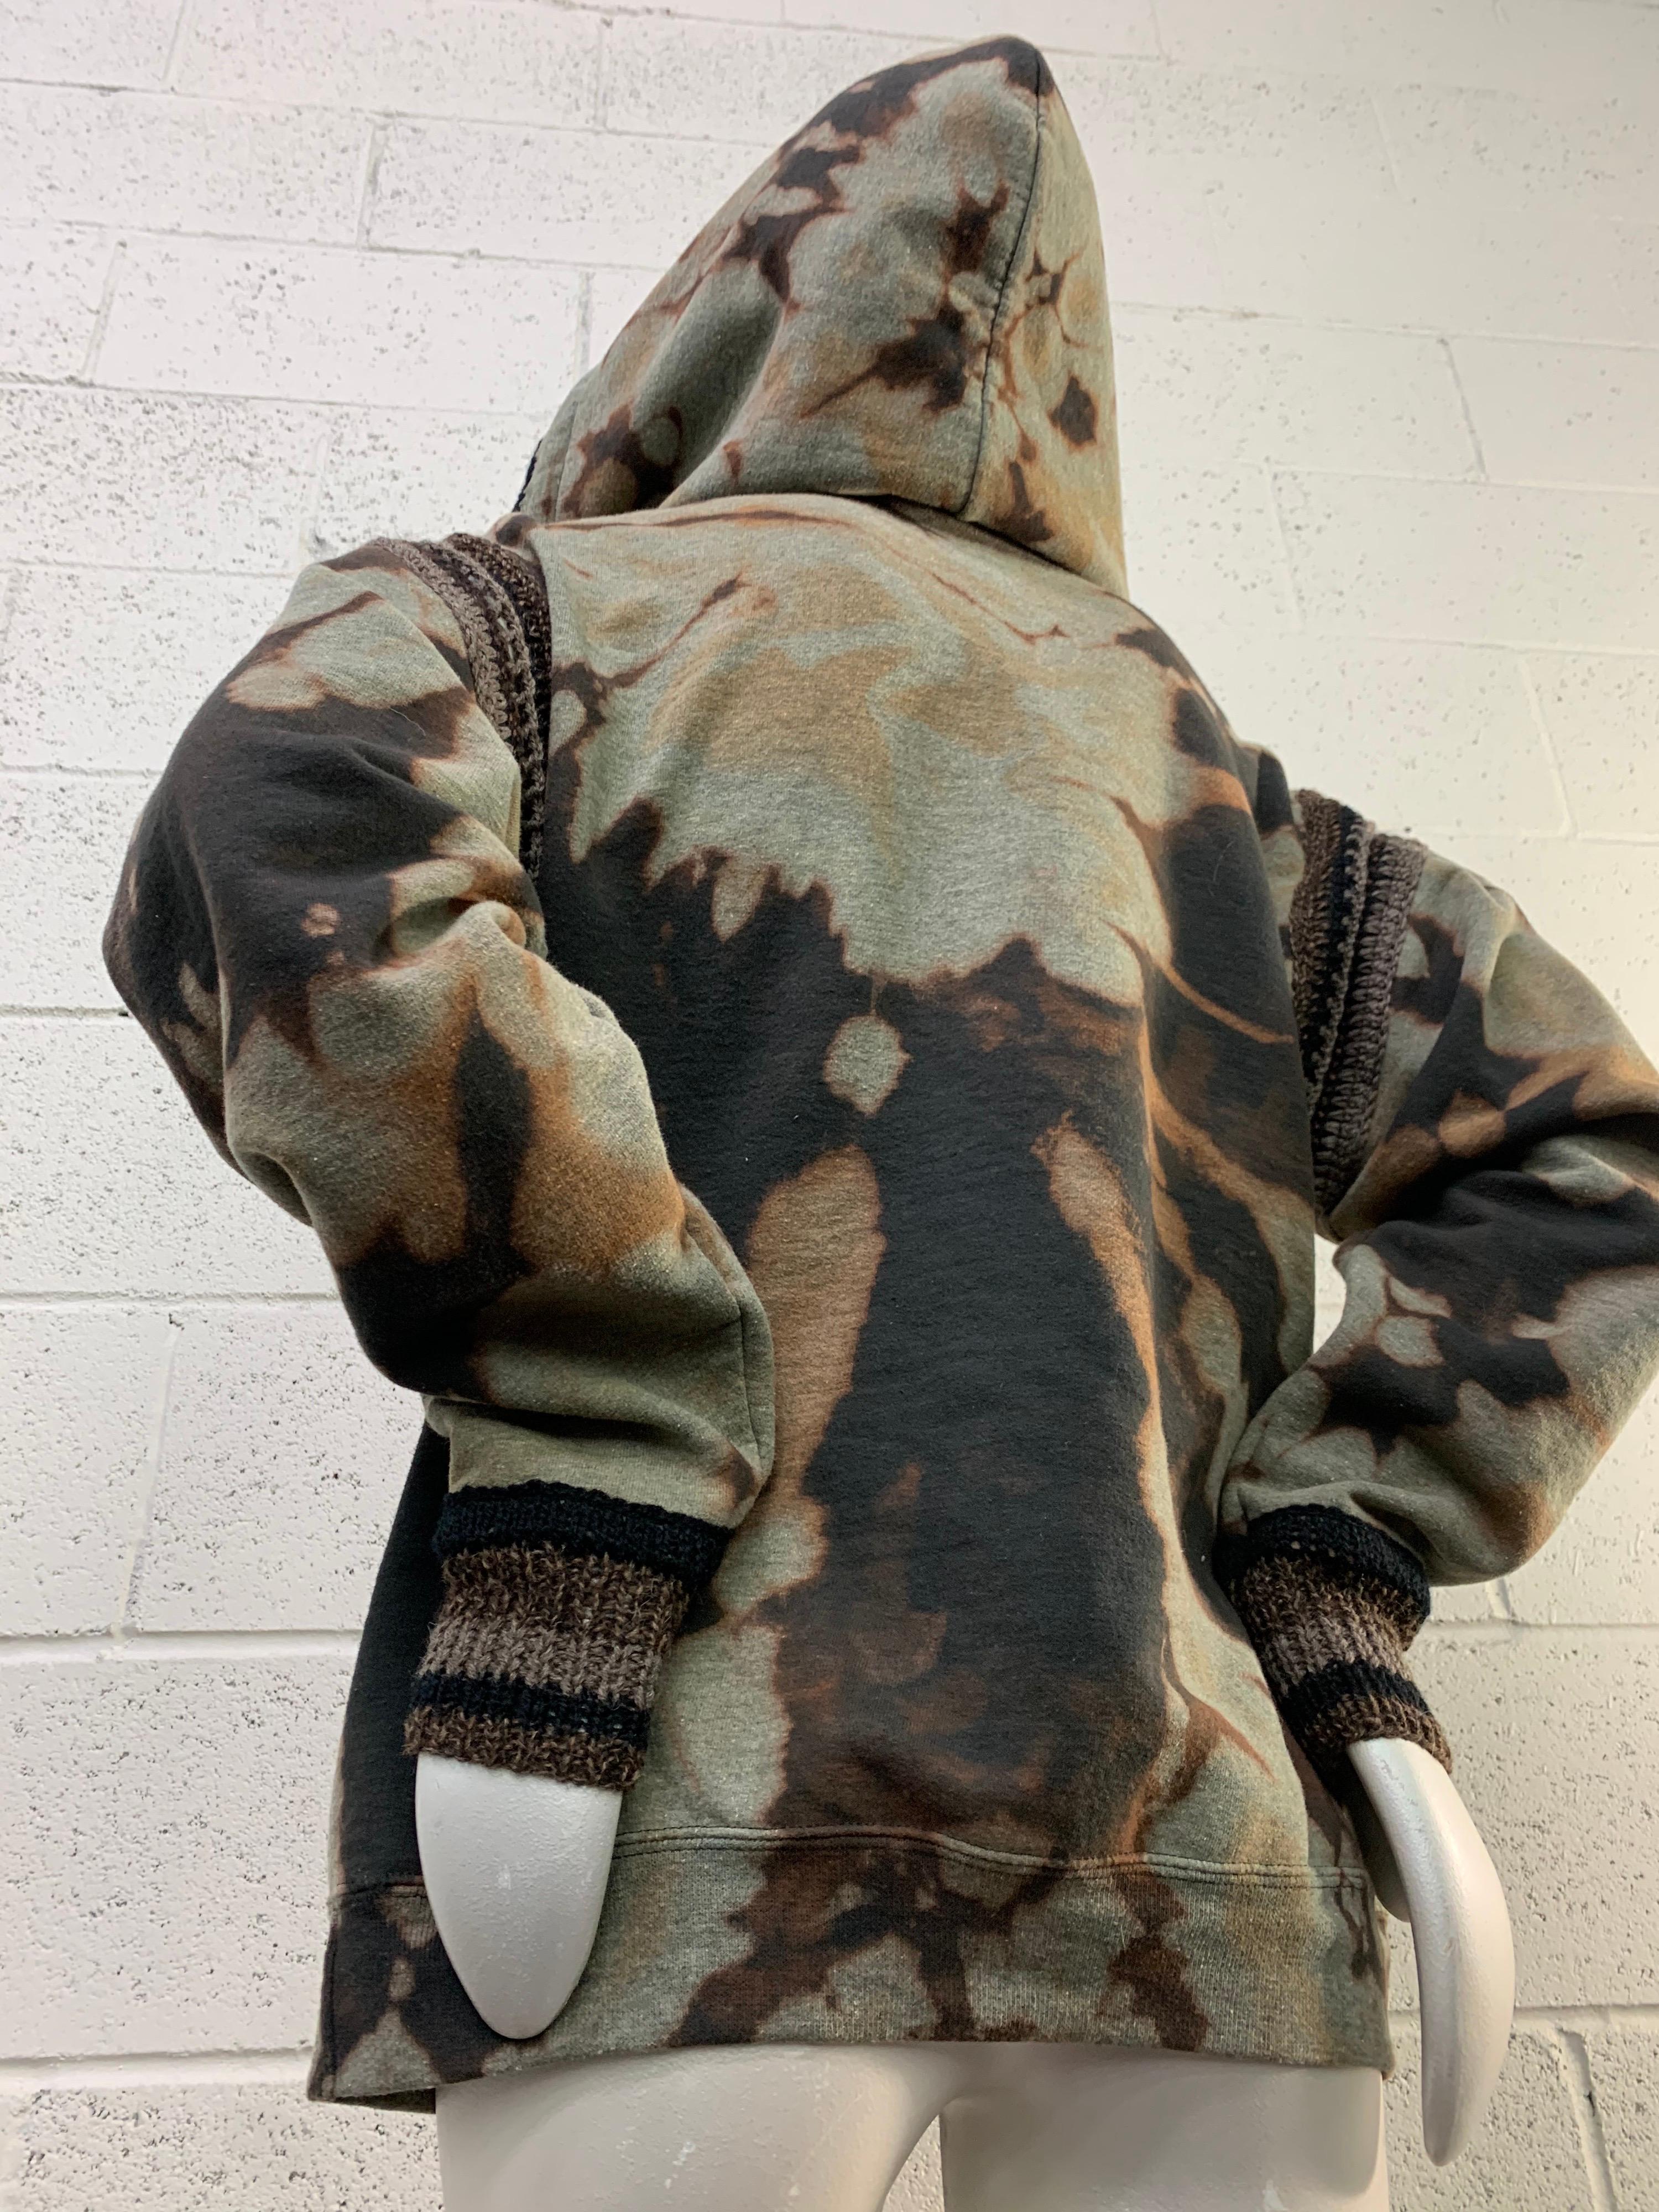 Torso Creations Tie-Dye Cotton Fleece Hoodie w/ Hand-Knit Inset Details  In New Condition For Sale In Gresham, OR